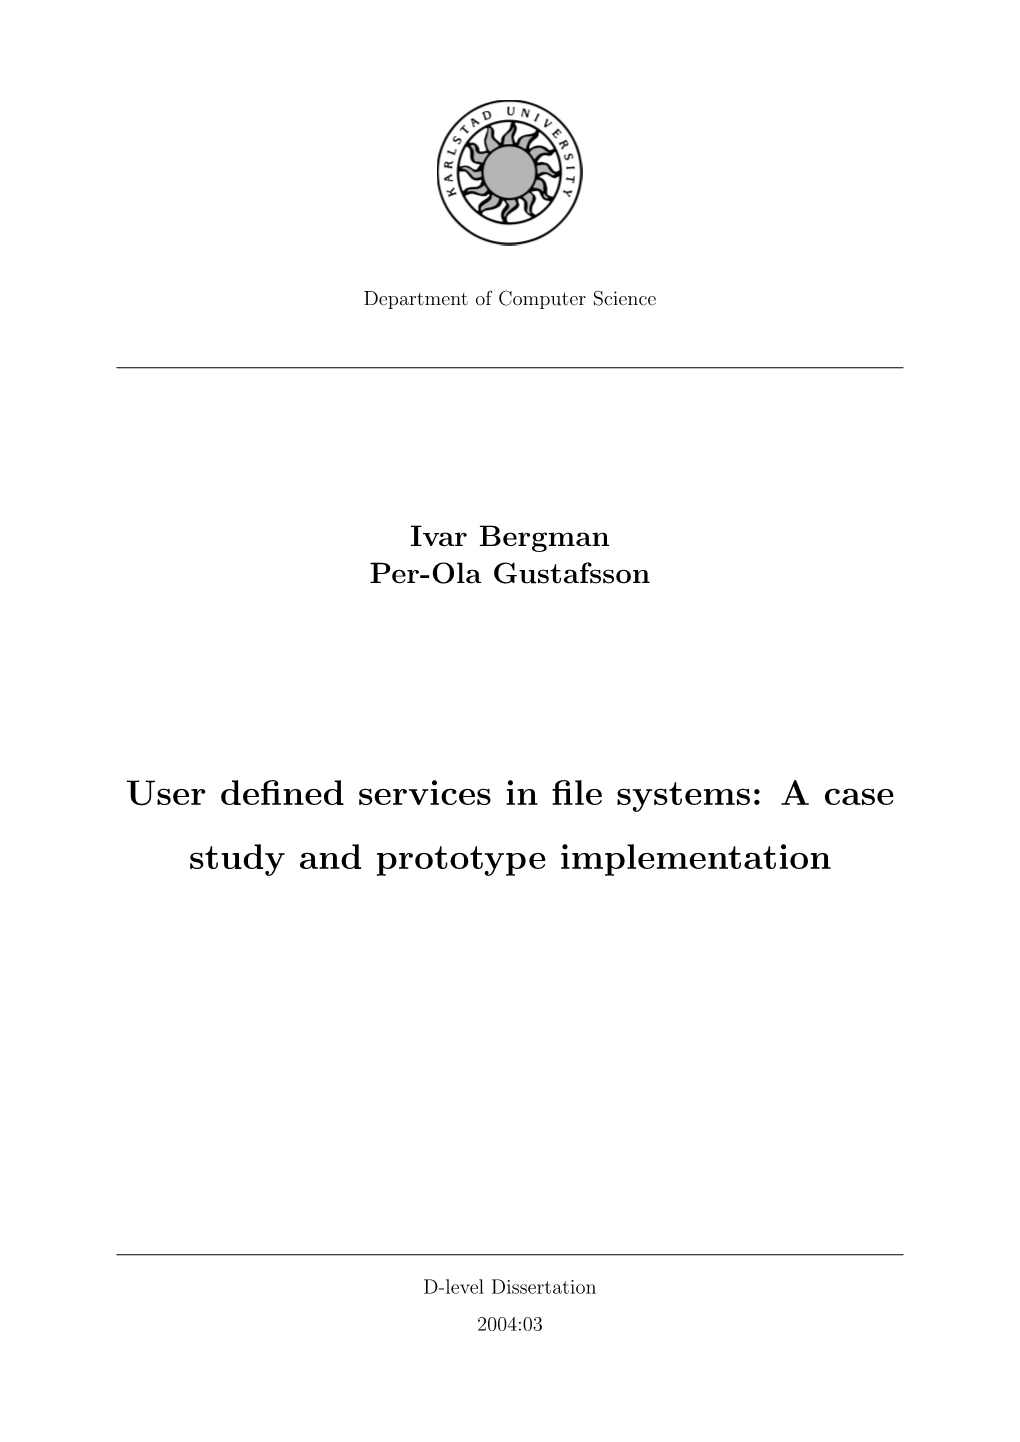 User Defined Services in File Systems: a Case Study and Prototype